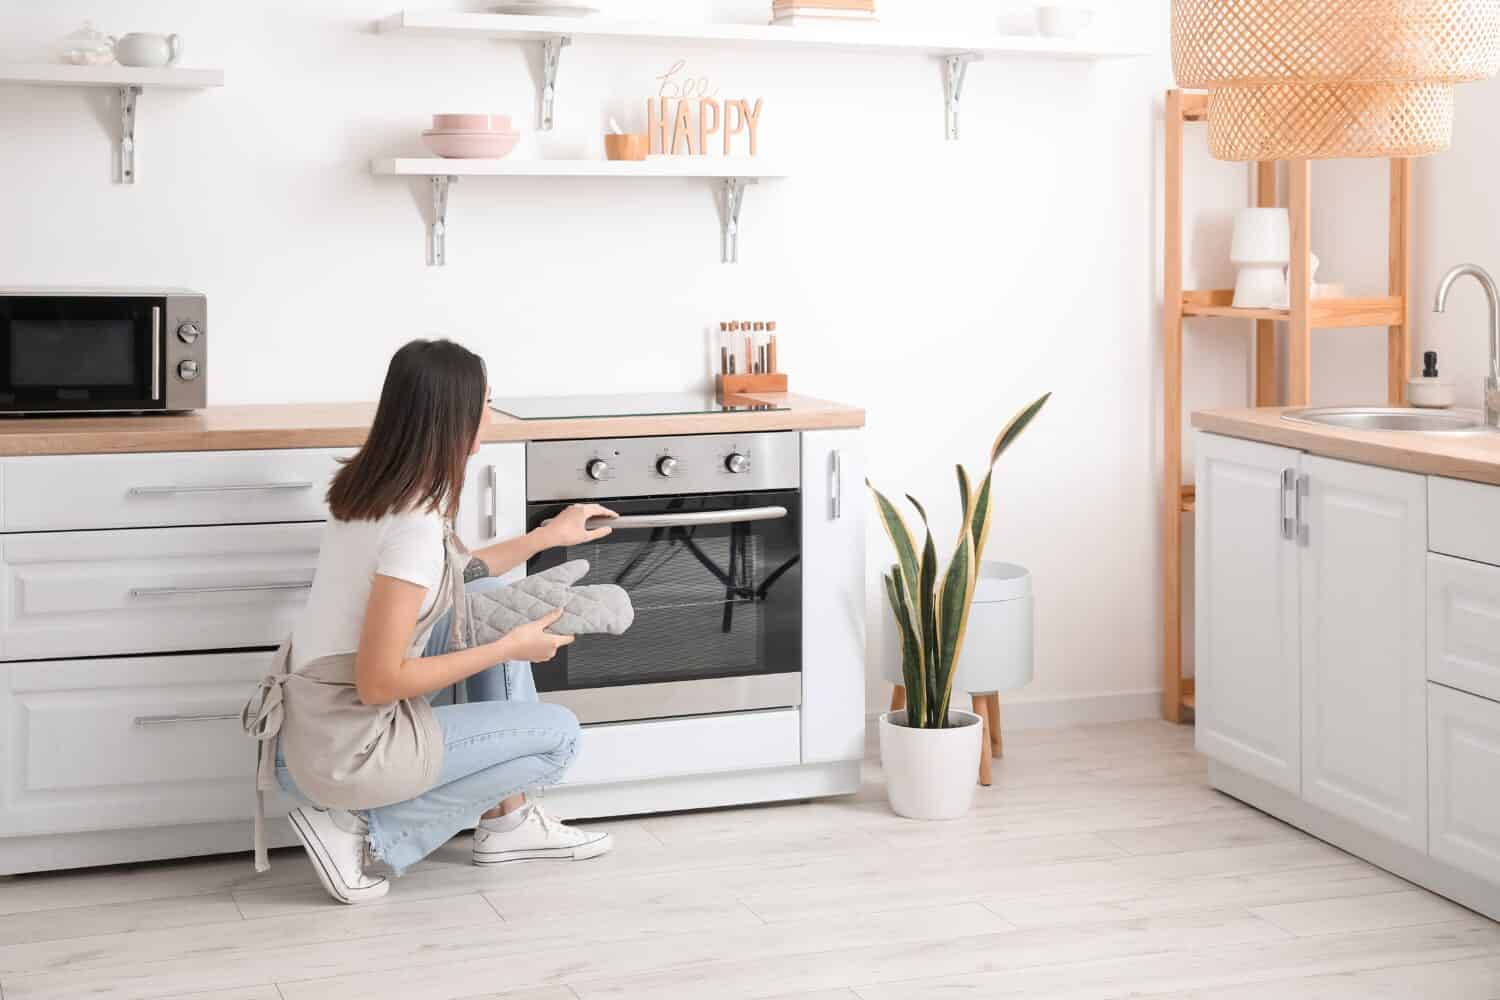 Baking Wars: Convection Ovens vs. Conventional Ovens